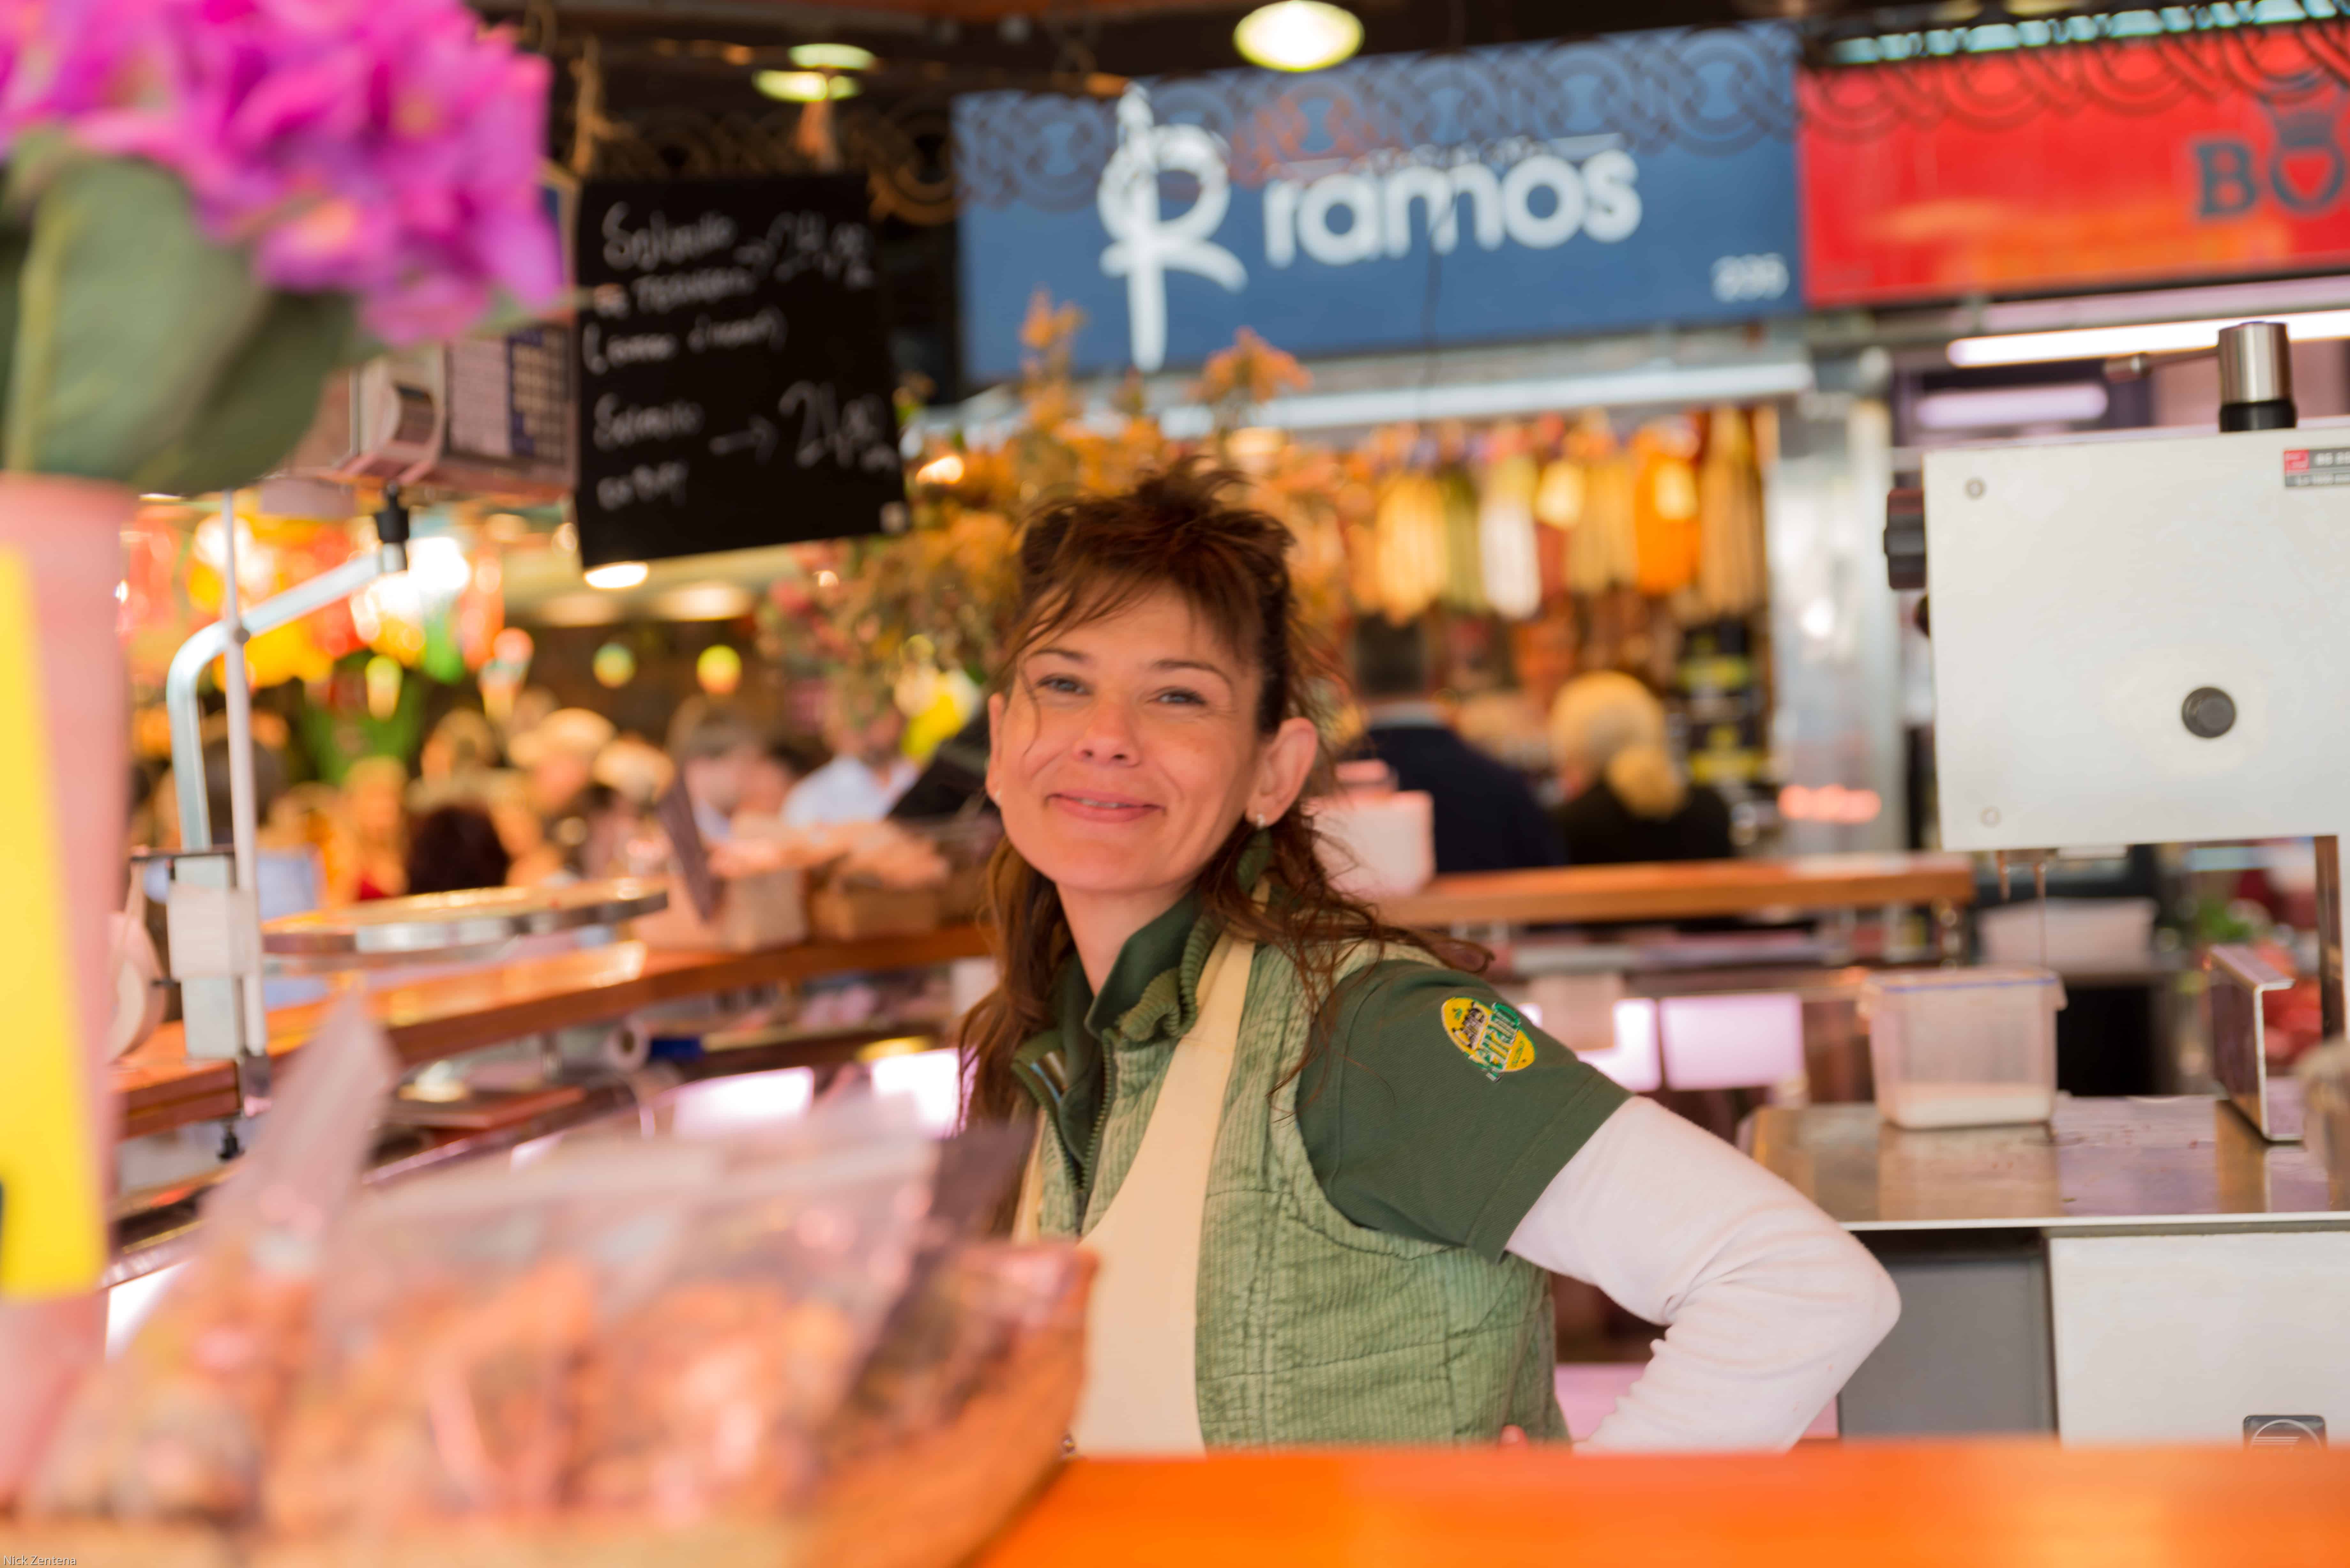 Barcelona and it’s markets . A photographic visit